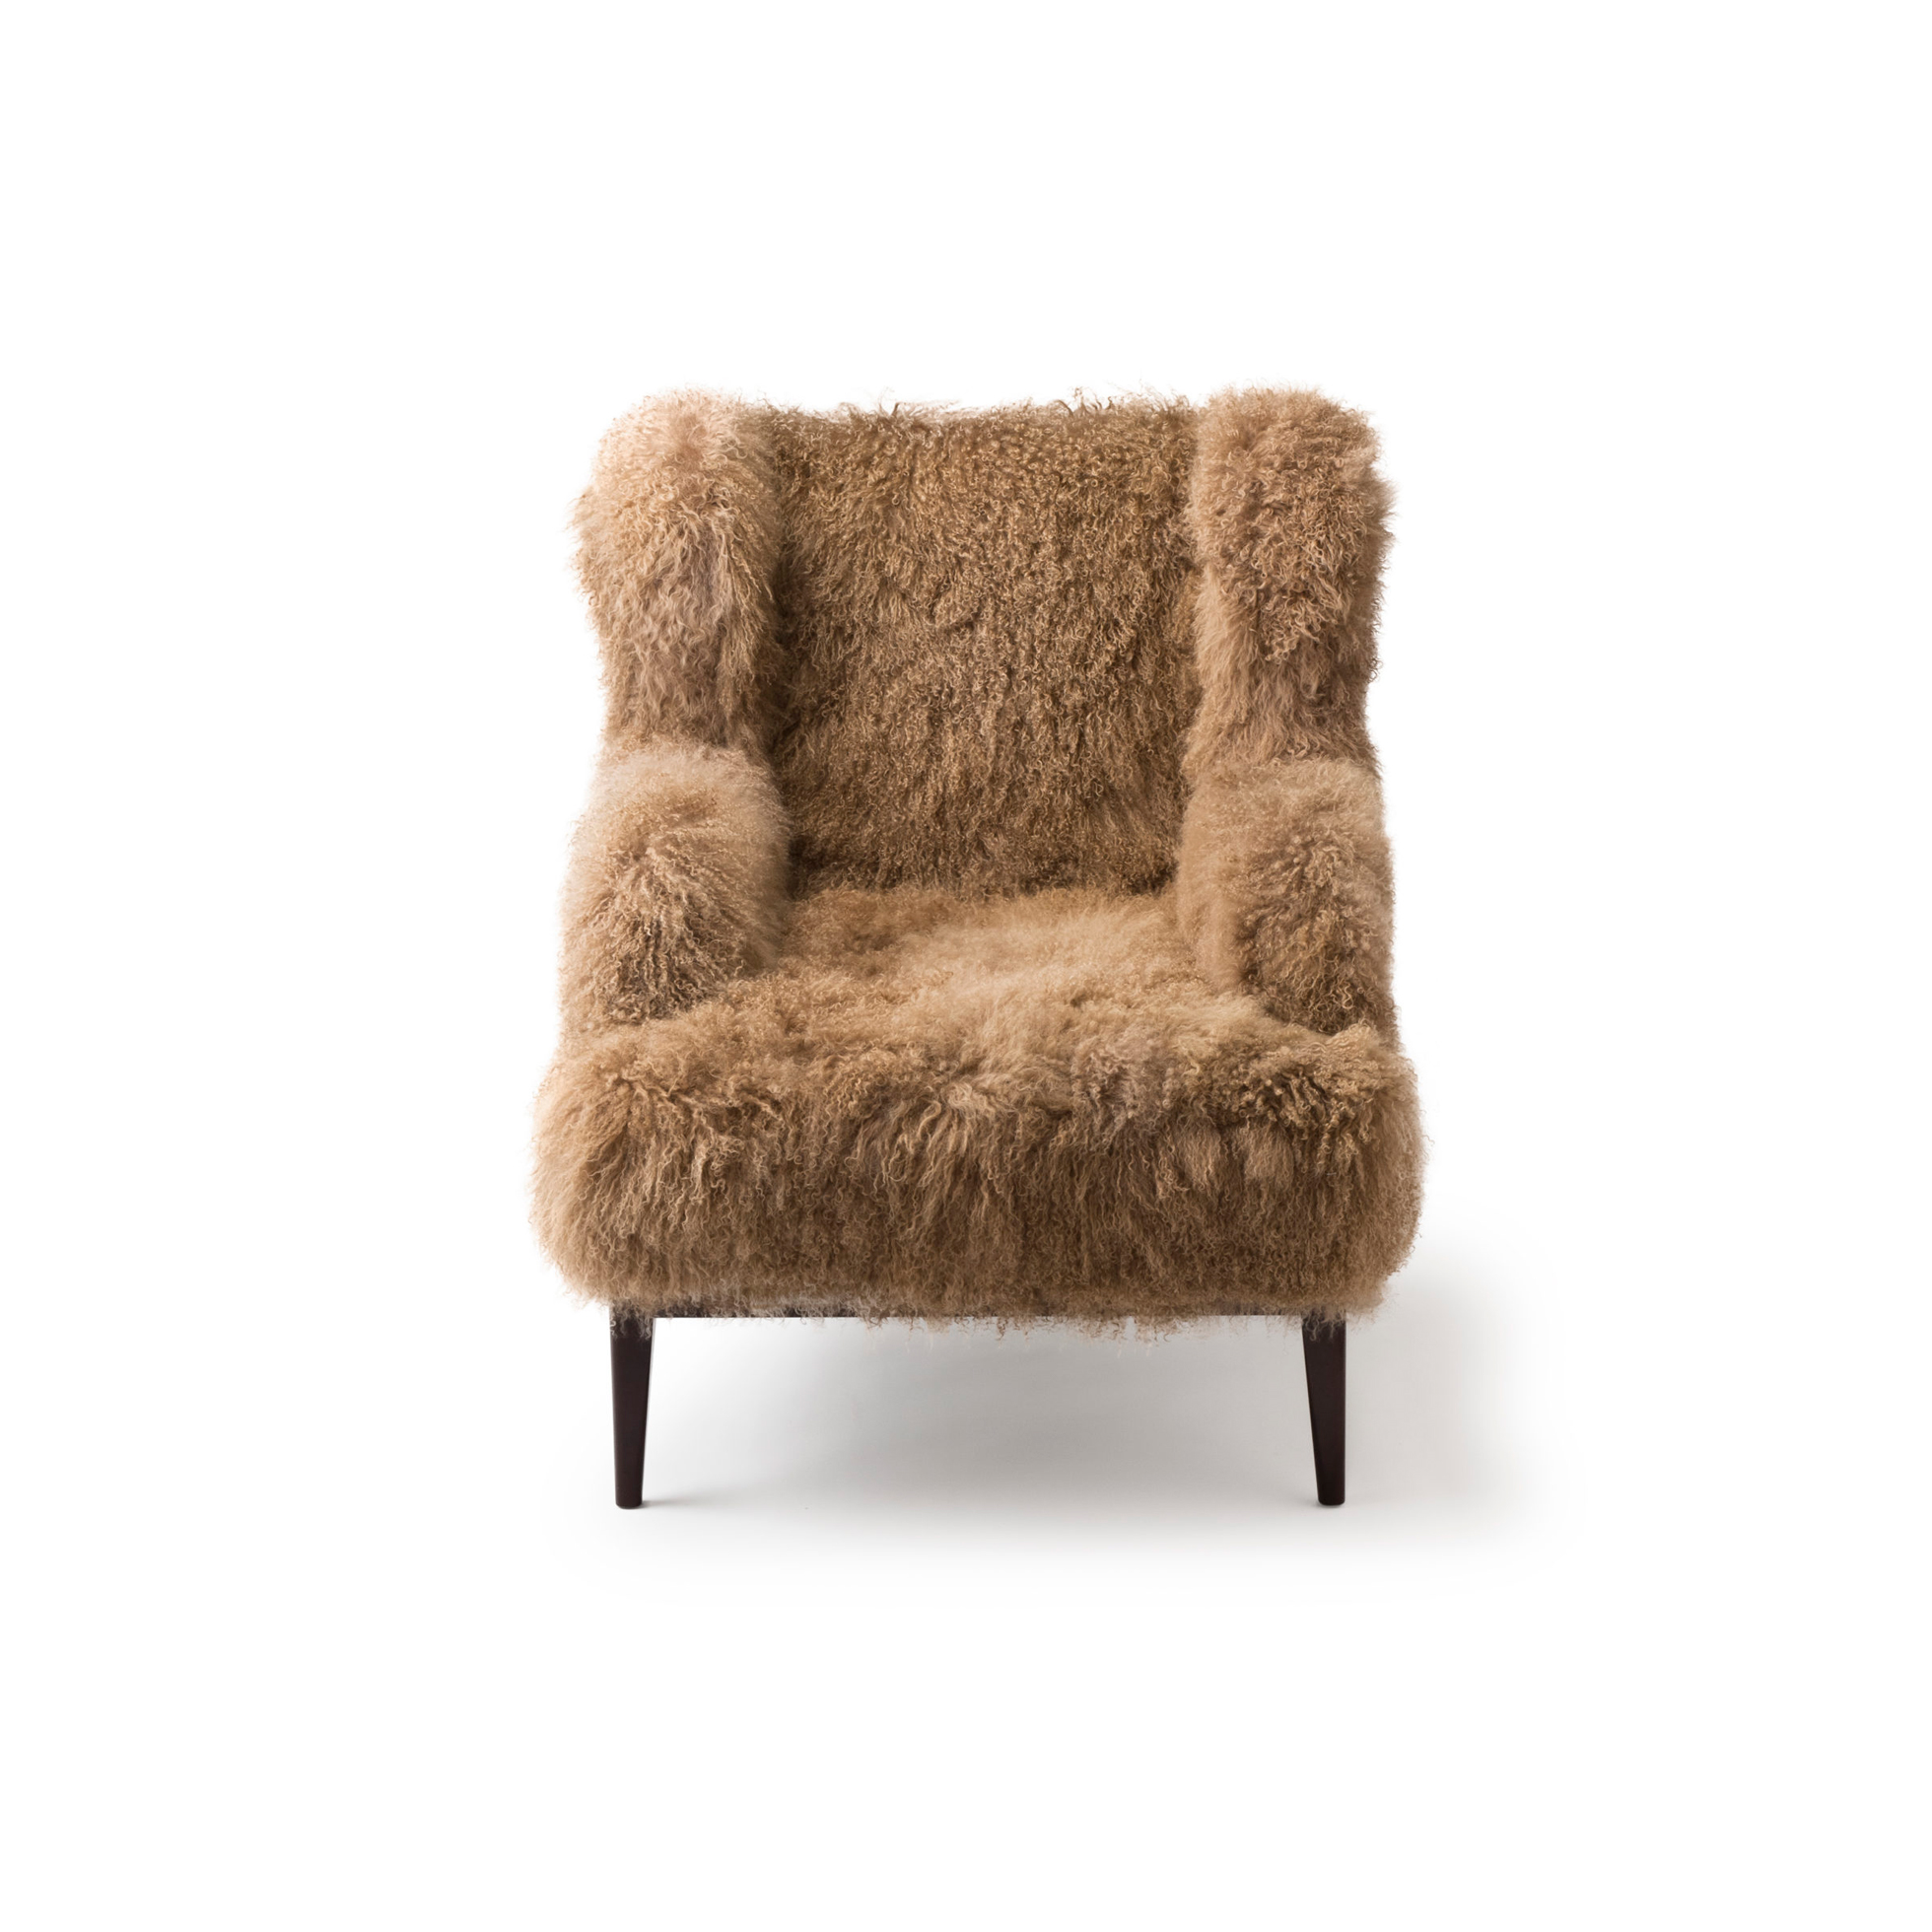 mammoth wing  mammoth wing chair  